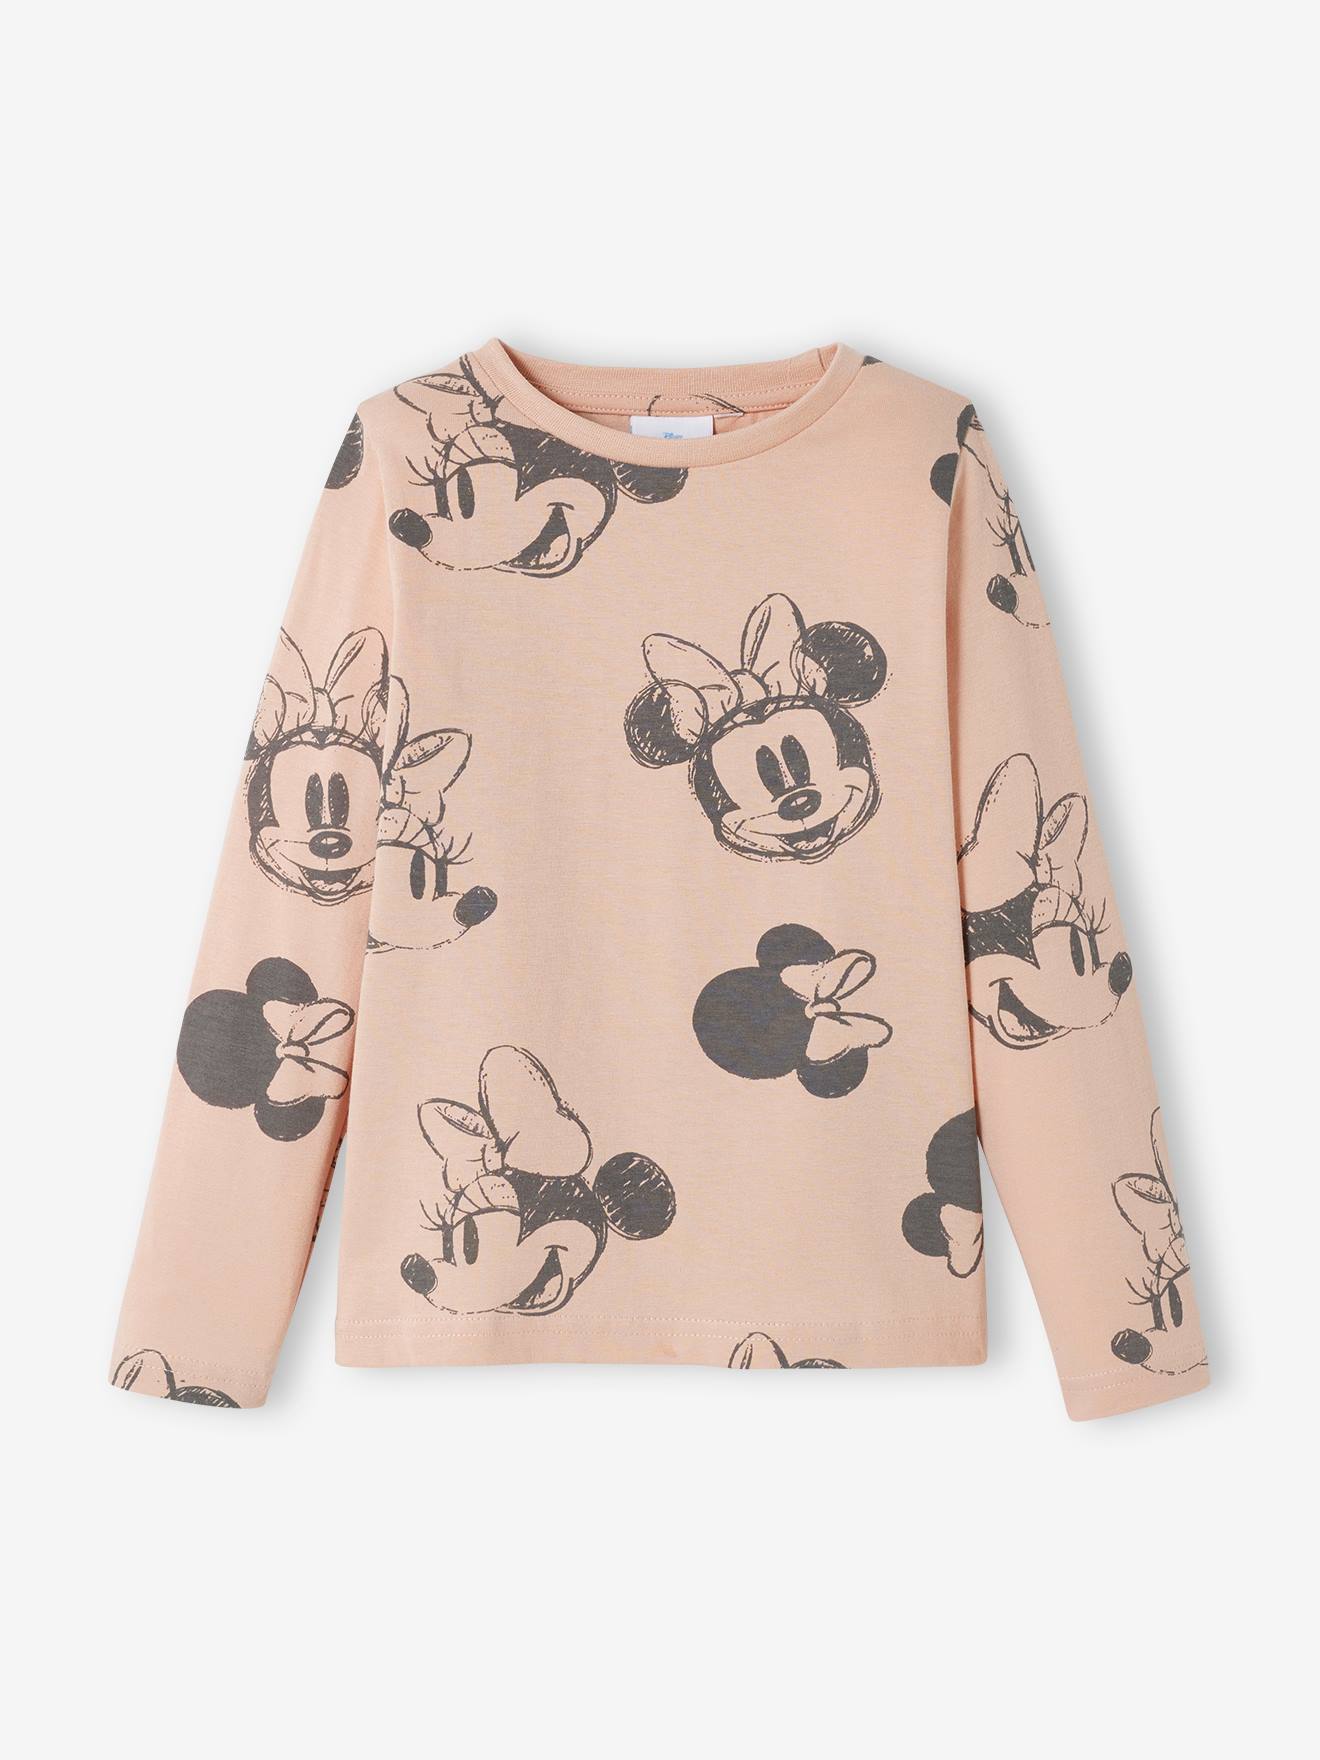 Long Sleeve Minnie Mouse Top for Girls by Disney(r) pink dark all over printed